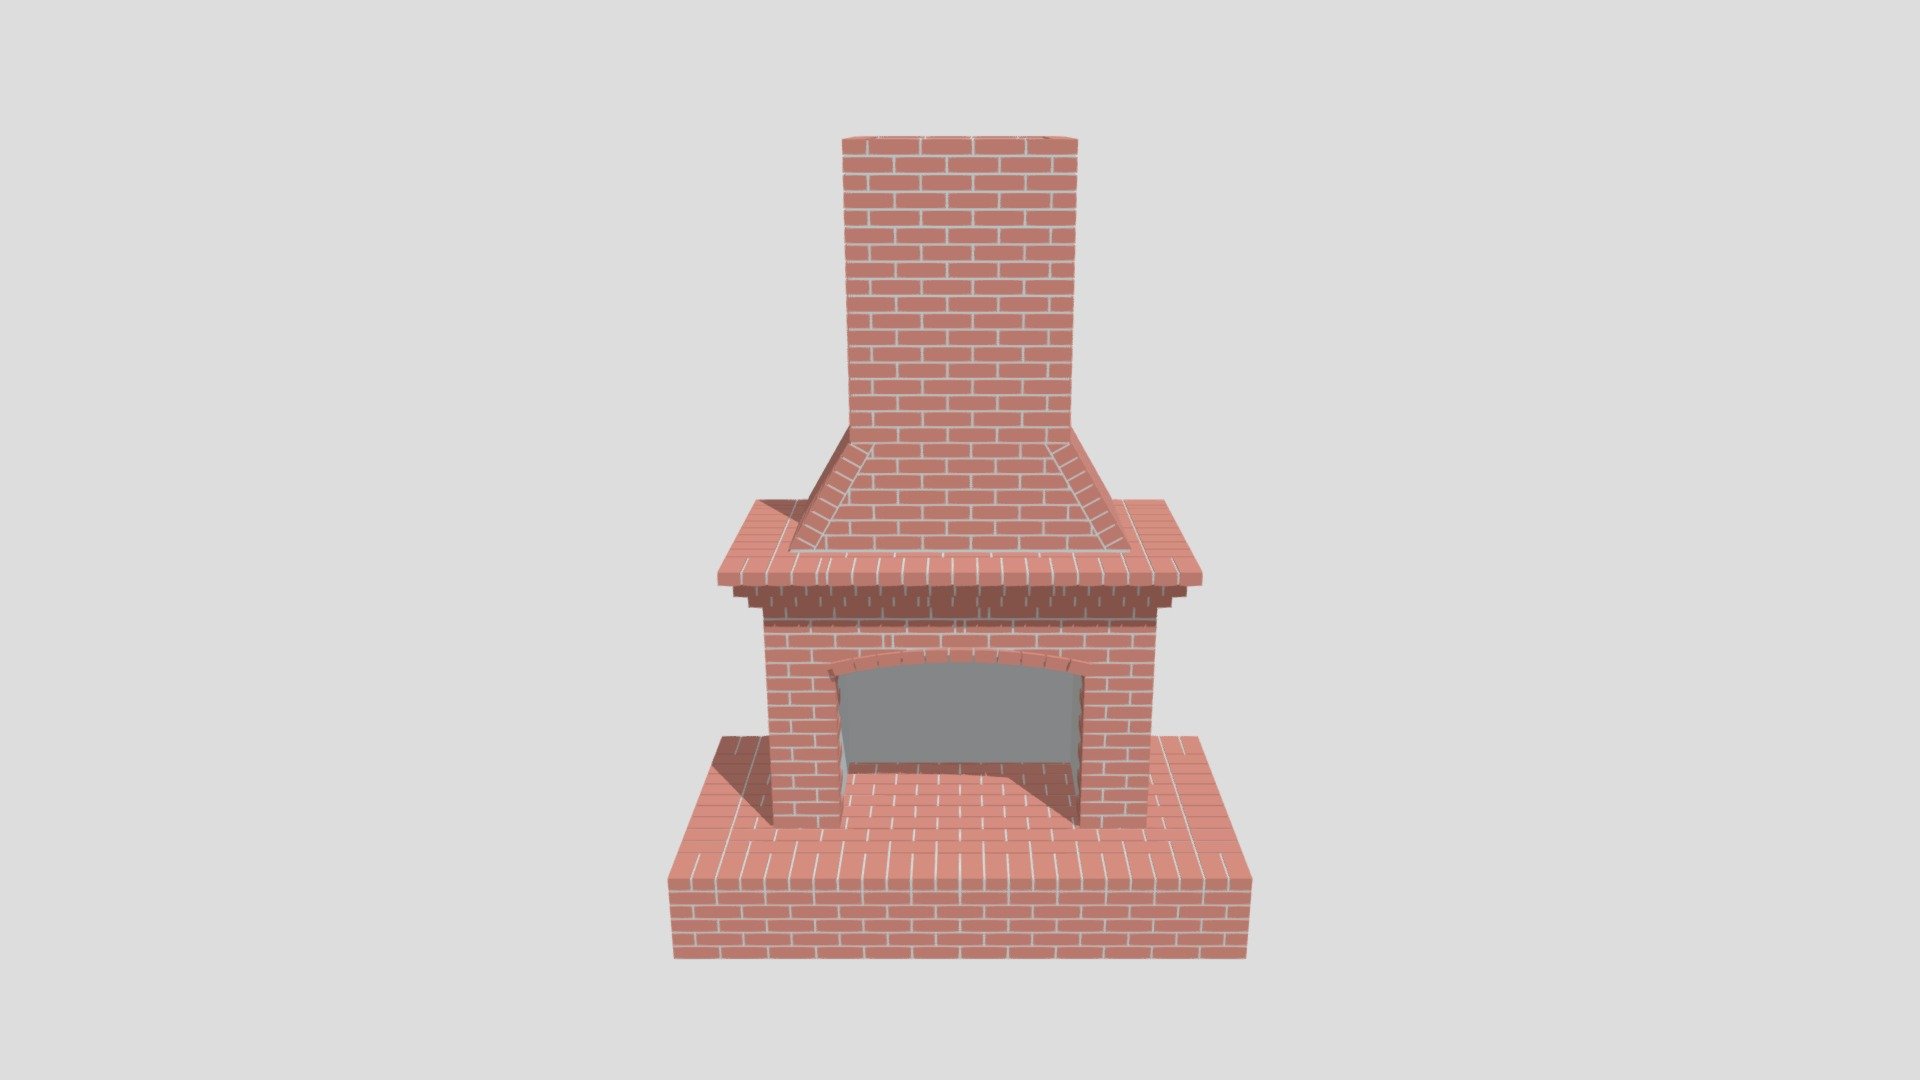 Arch Vis project for an outdoor Chimney - Chimney 12 21 20 - 3D model by hannahlawler 3d model